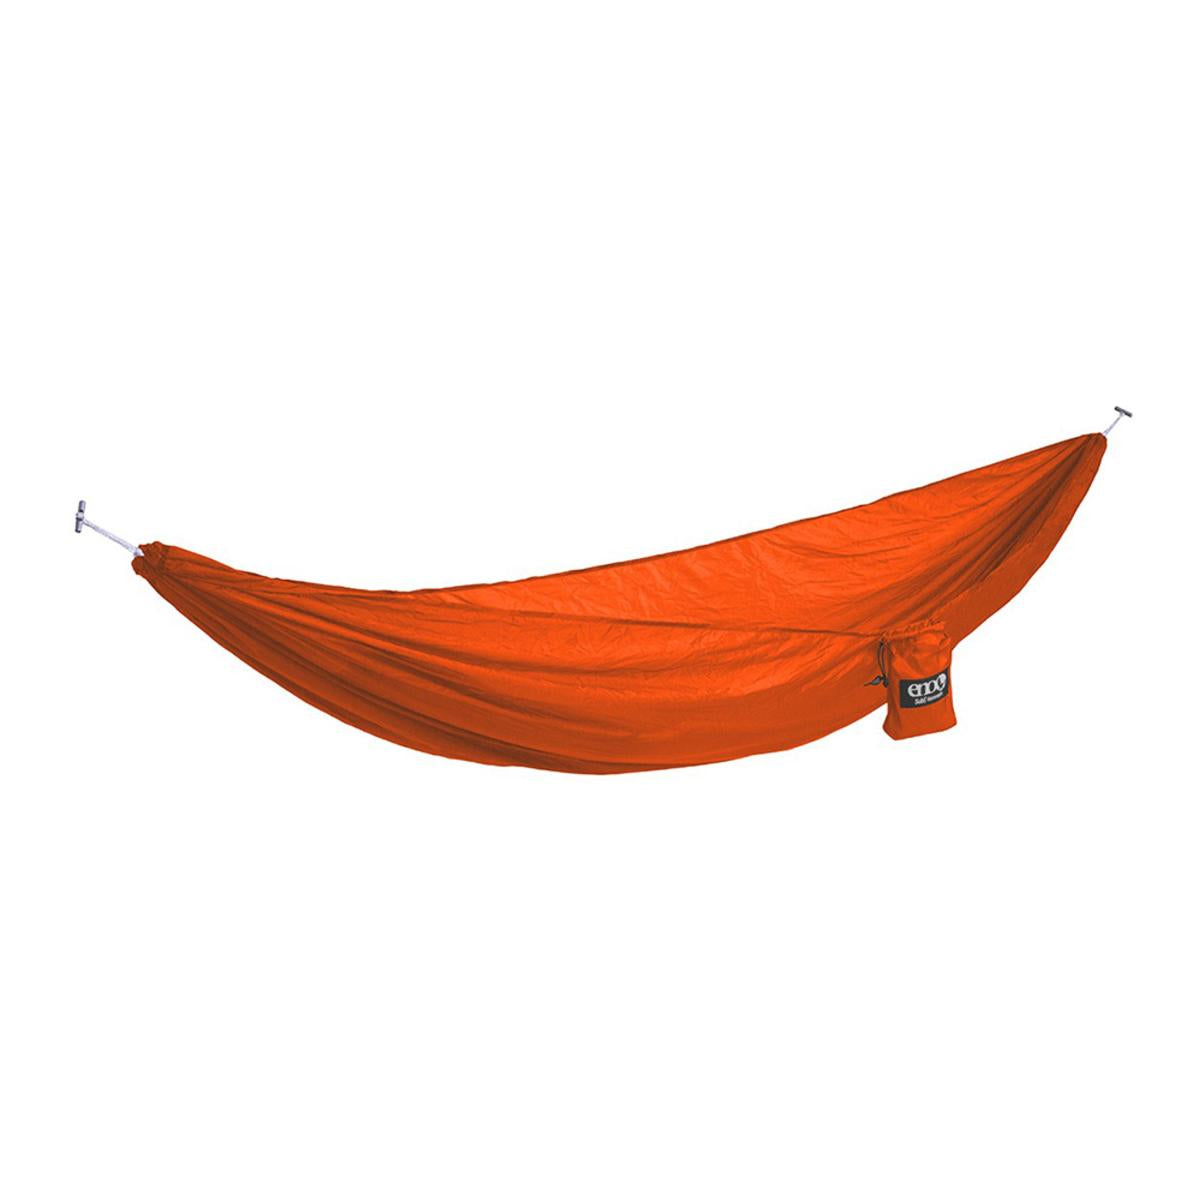 Eagles Nest Outfitters Sub6 Ultralight Hammock